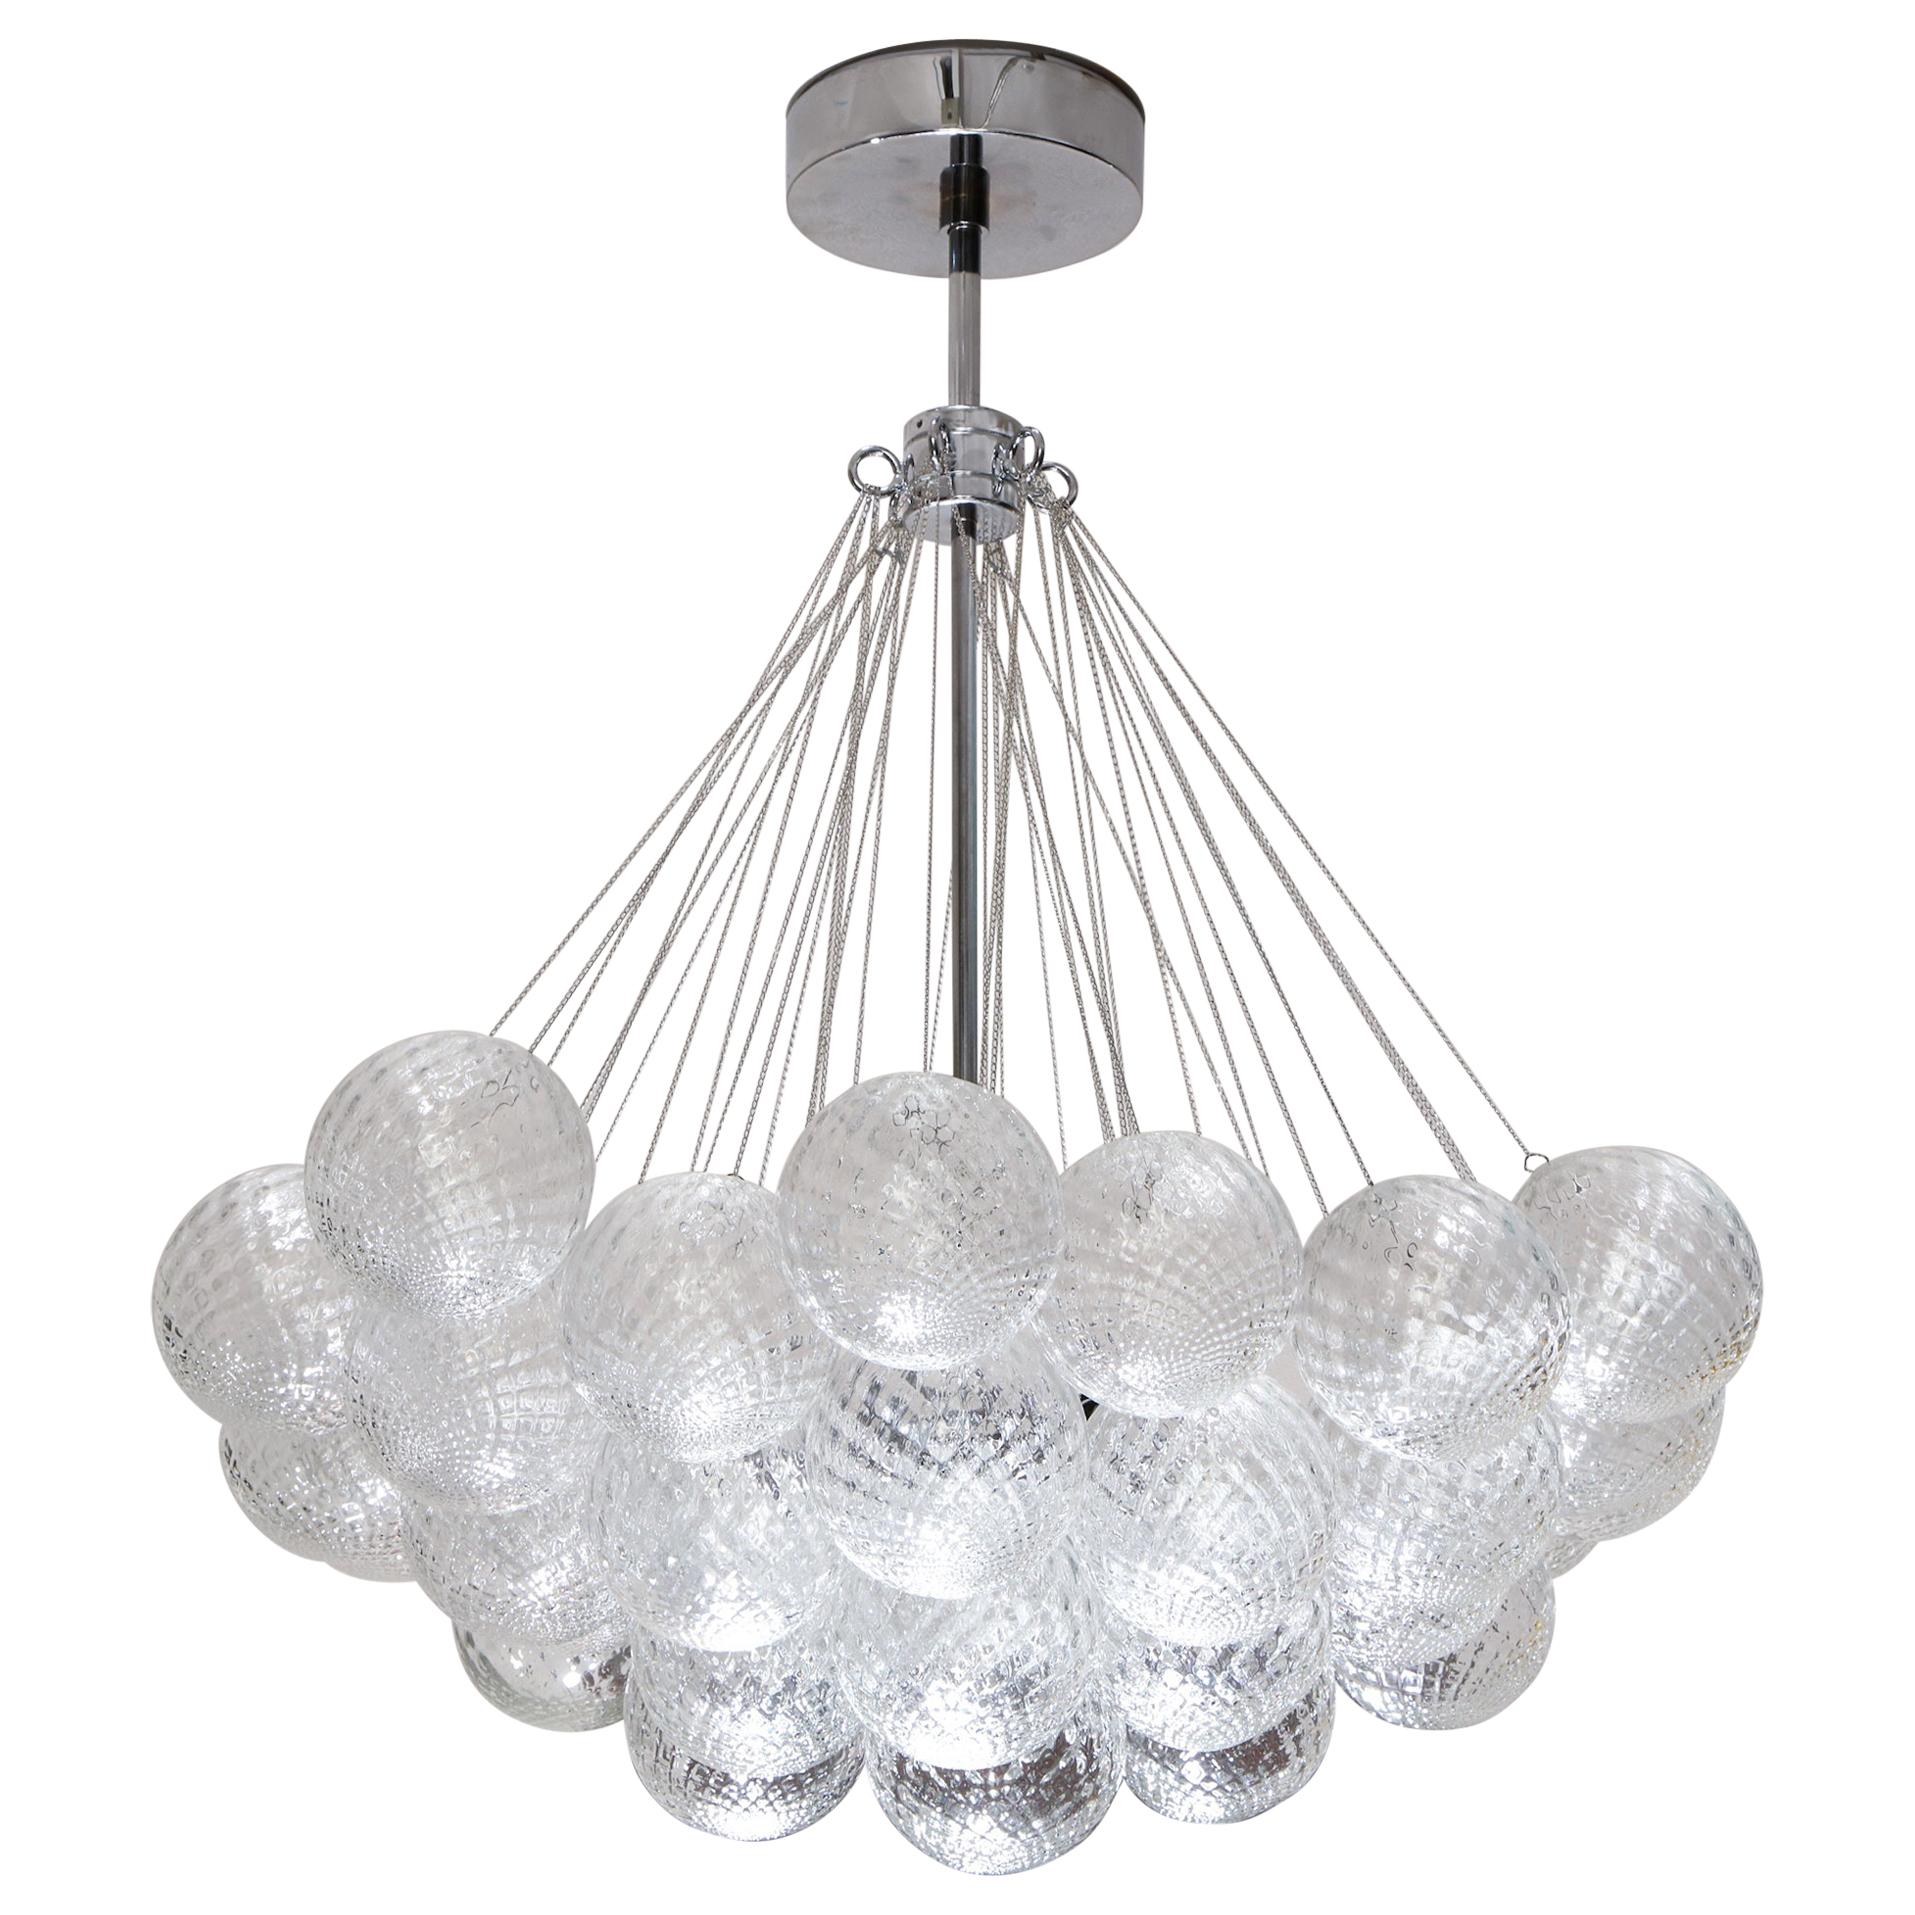 Murano Floating Clustered Globe Chandelier in Polished Nickel